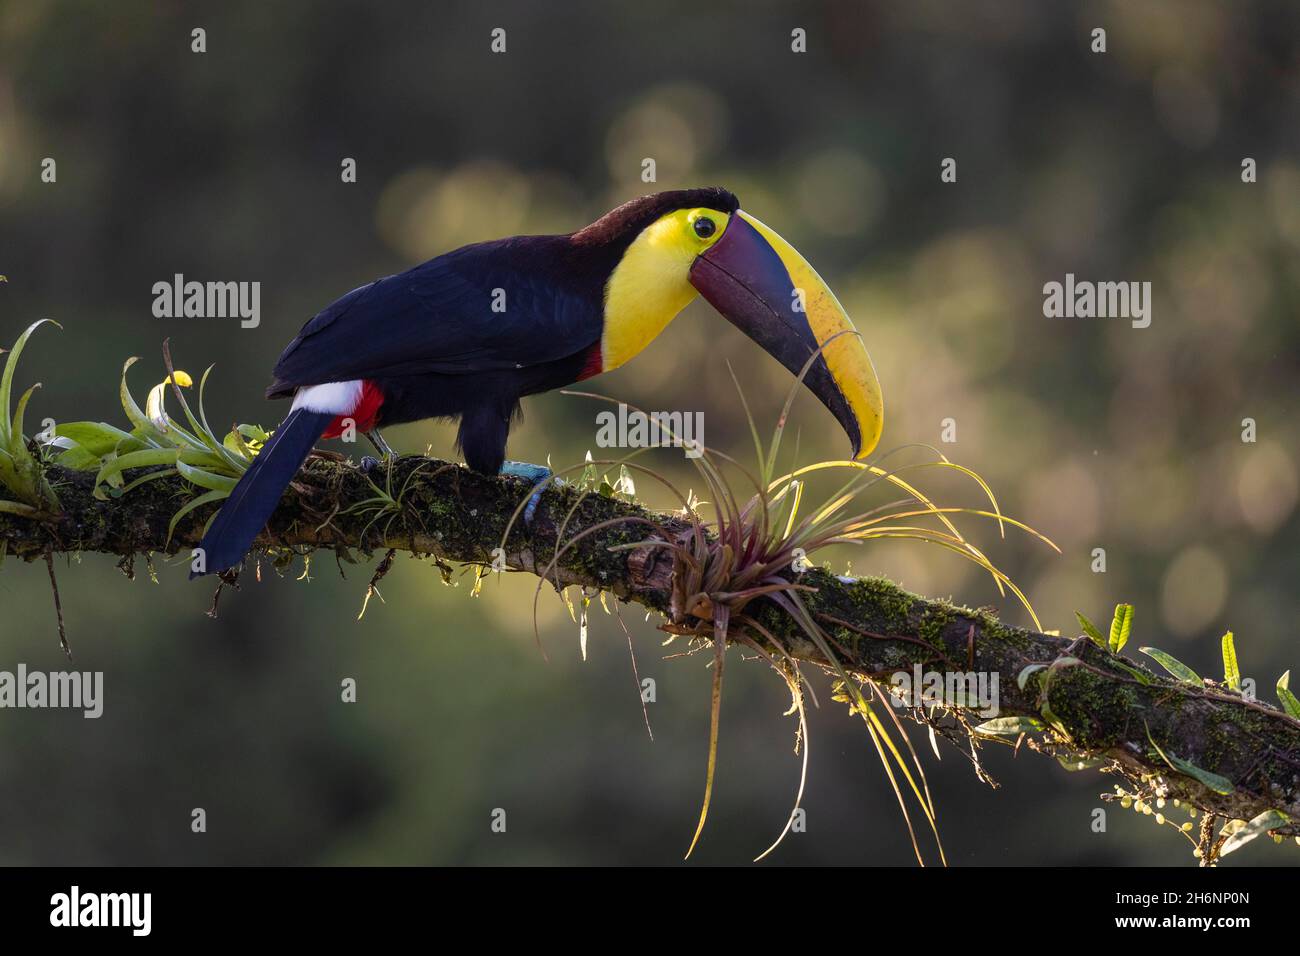 Swainson's toucan or Brown-backed toucan (Ramphastos swainsonii) on branch with bromeliads, Boca Tapada region, Costa Rica Stock Photo